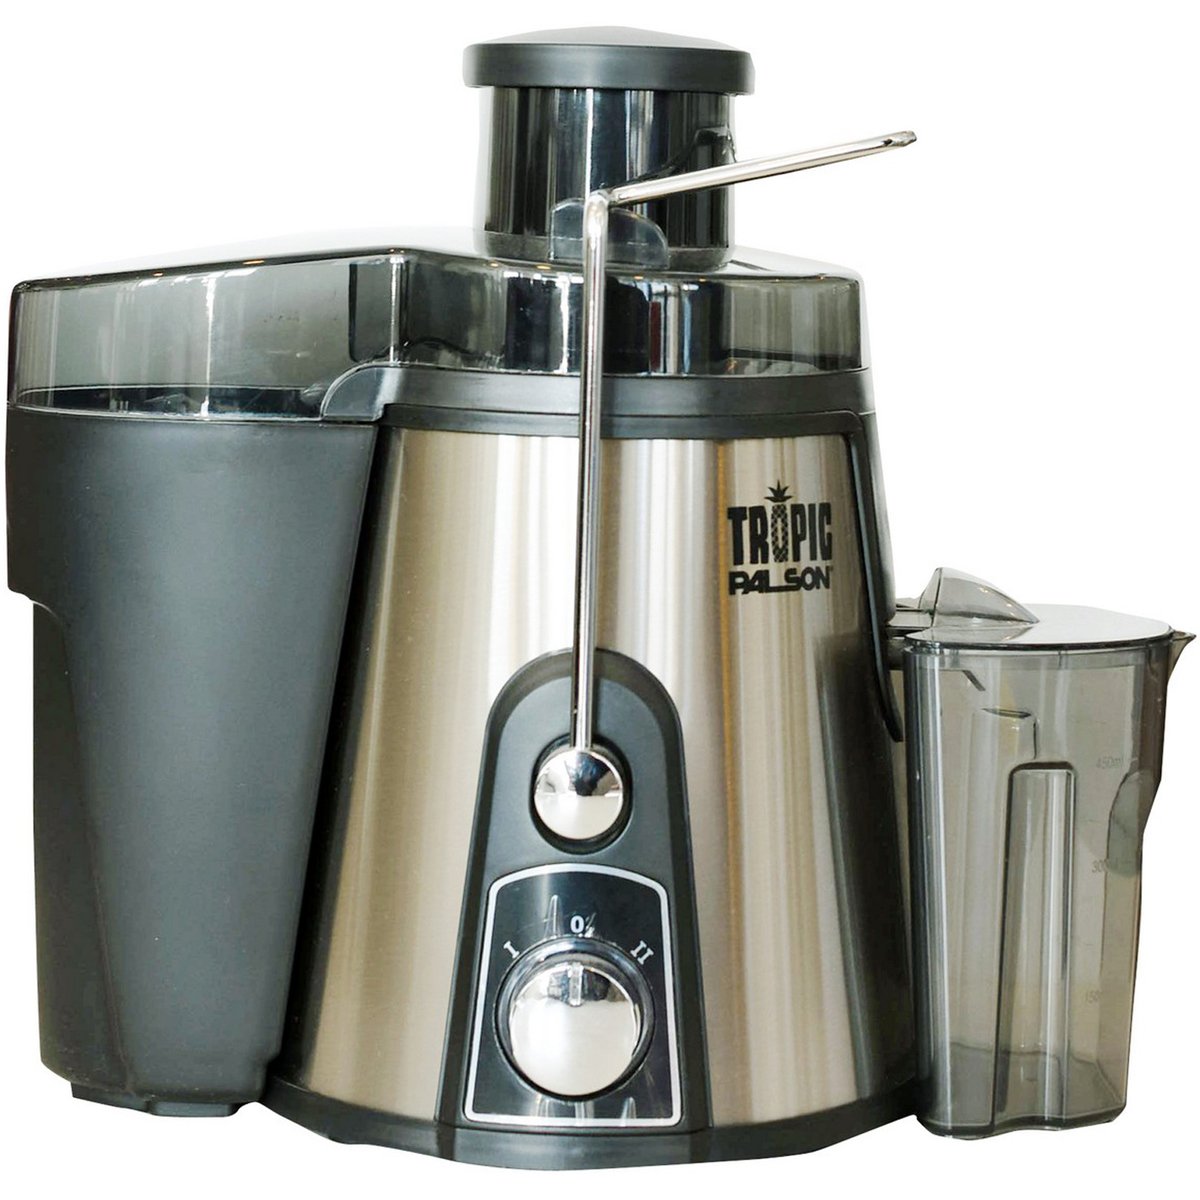 Palson Juicer Tropic 30825 400W